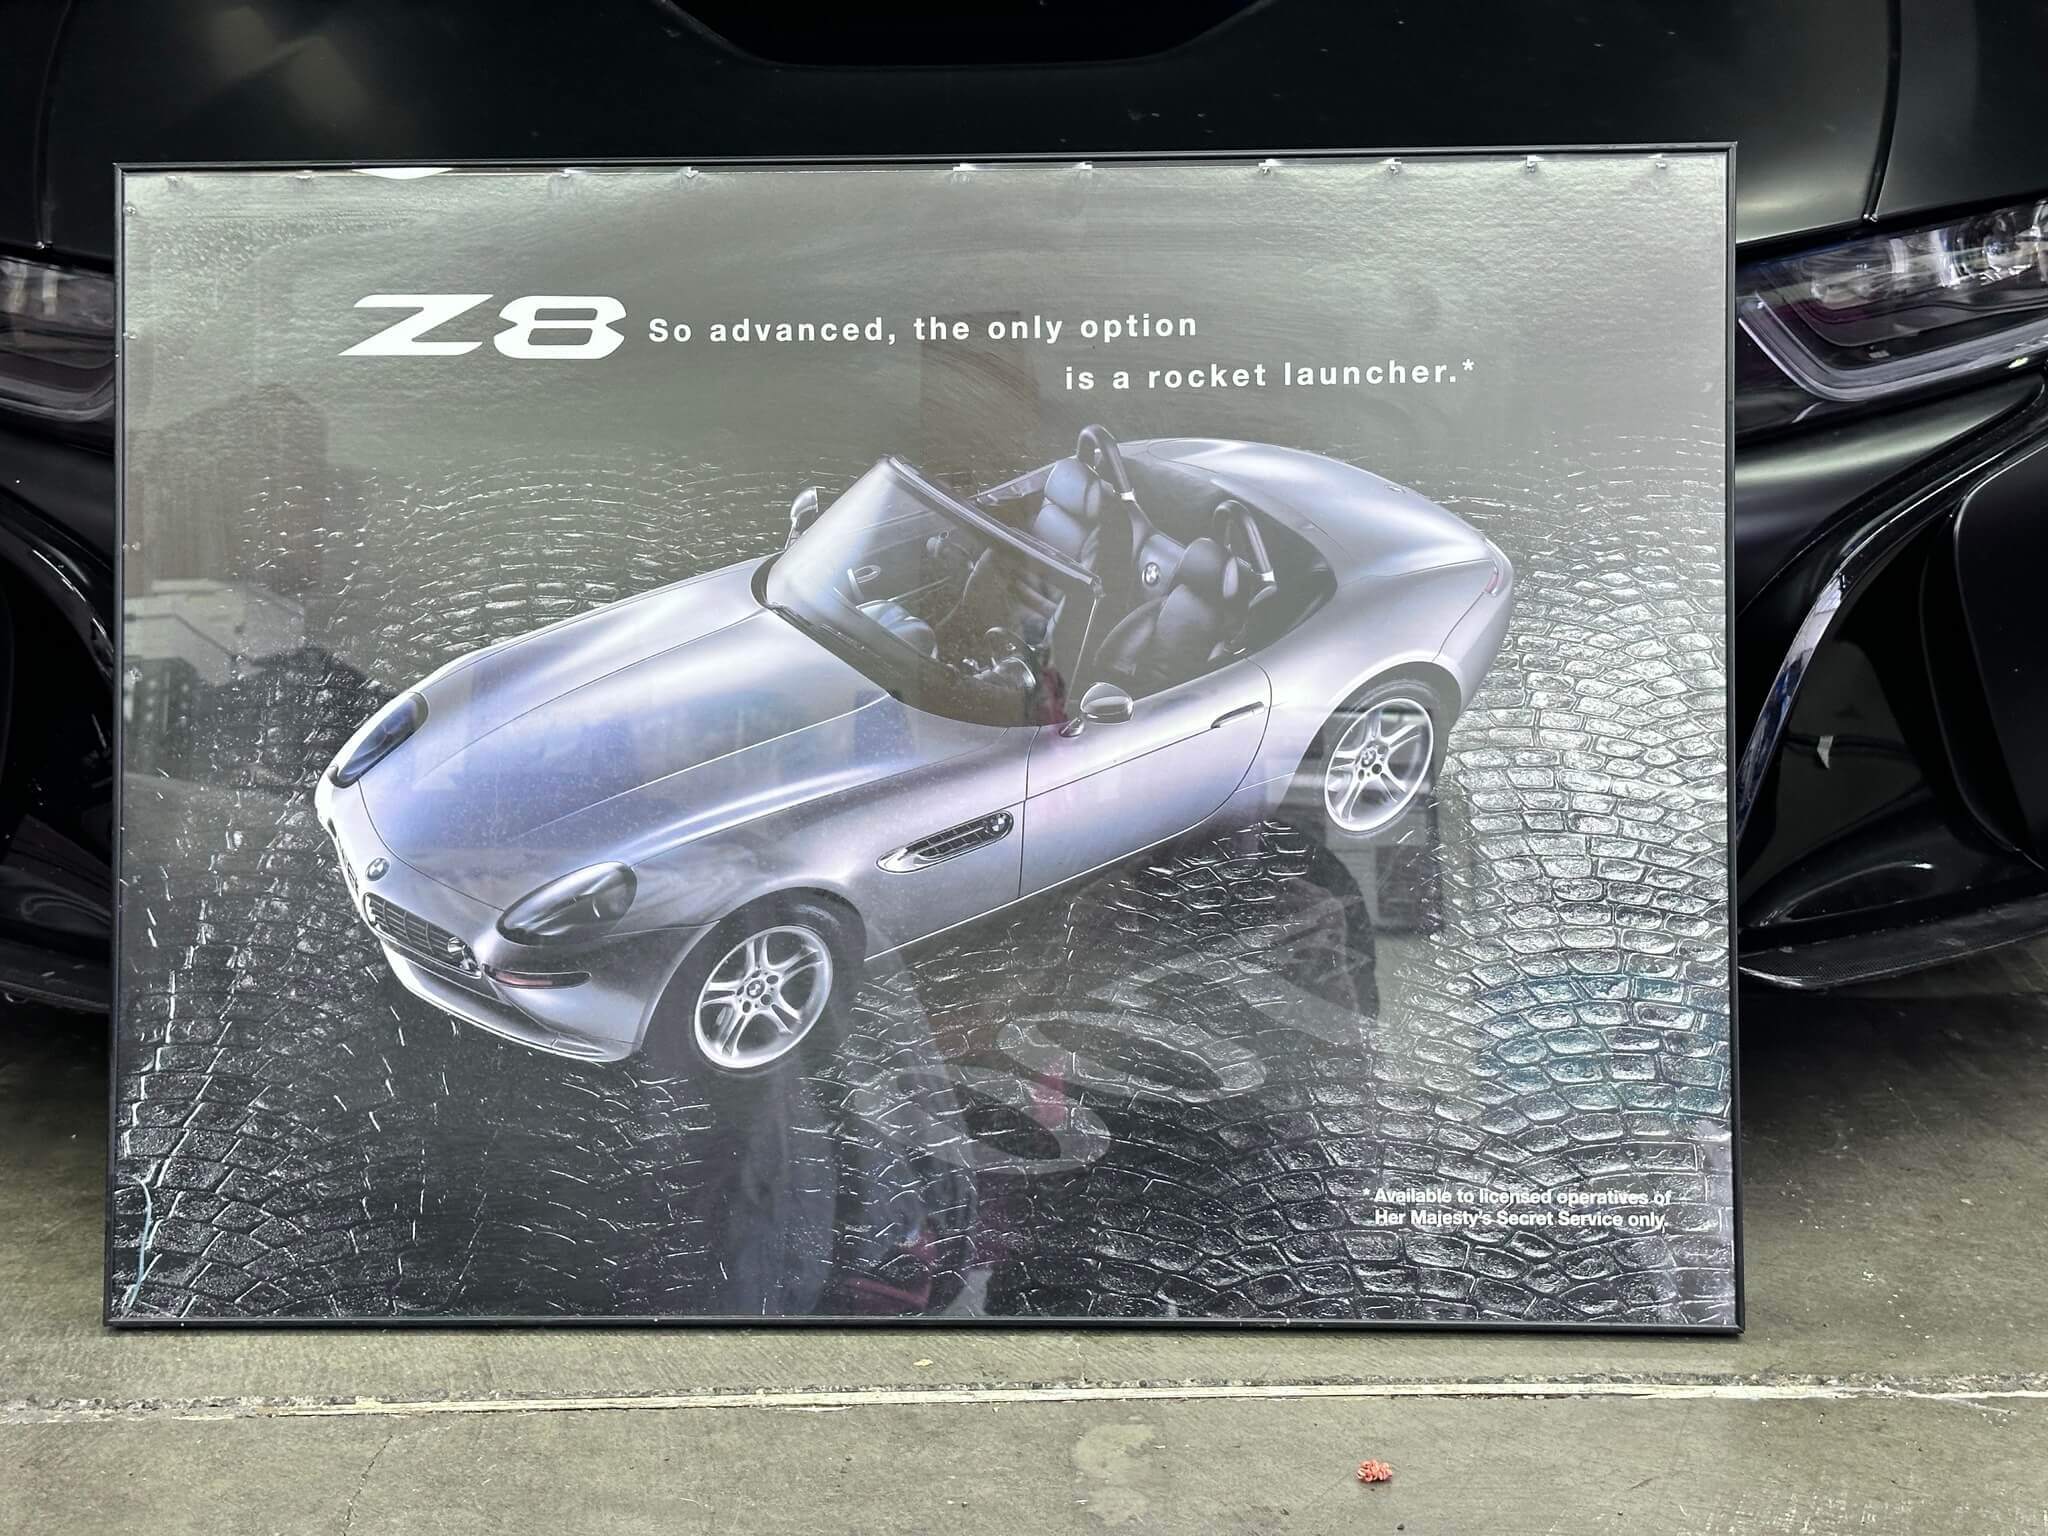 BMW Z8 Memorabilia, Accessories, Owners Manuals and Launch Kit